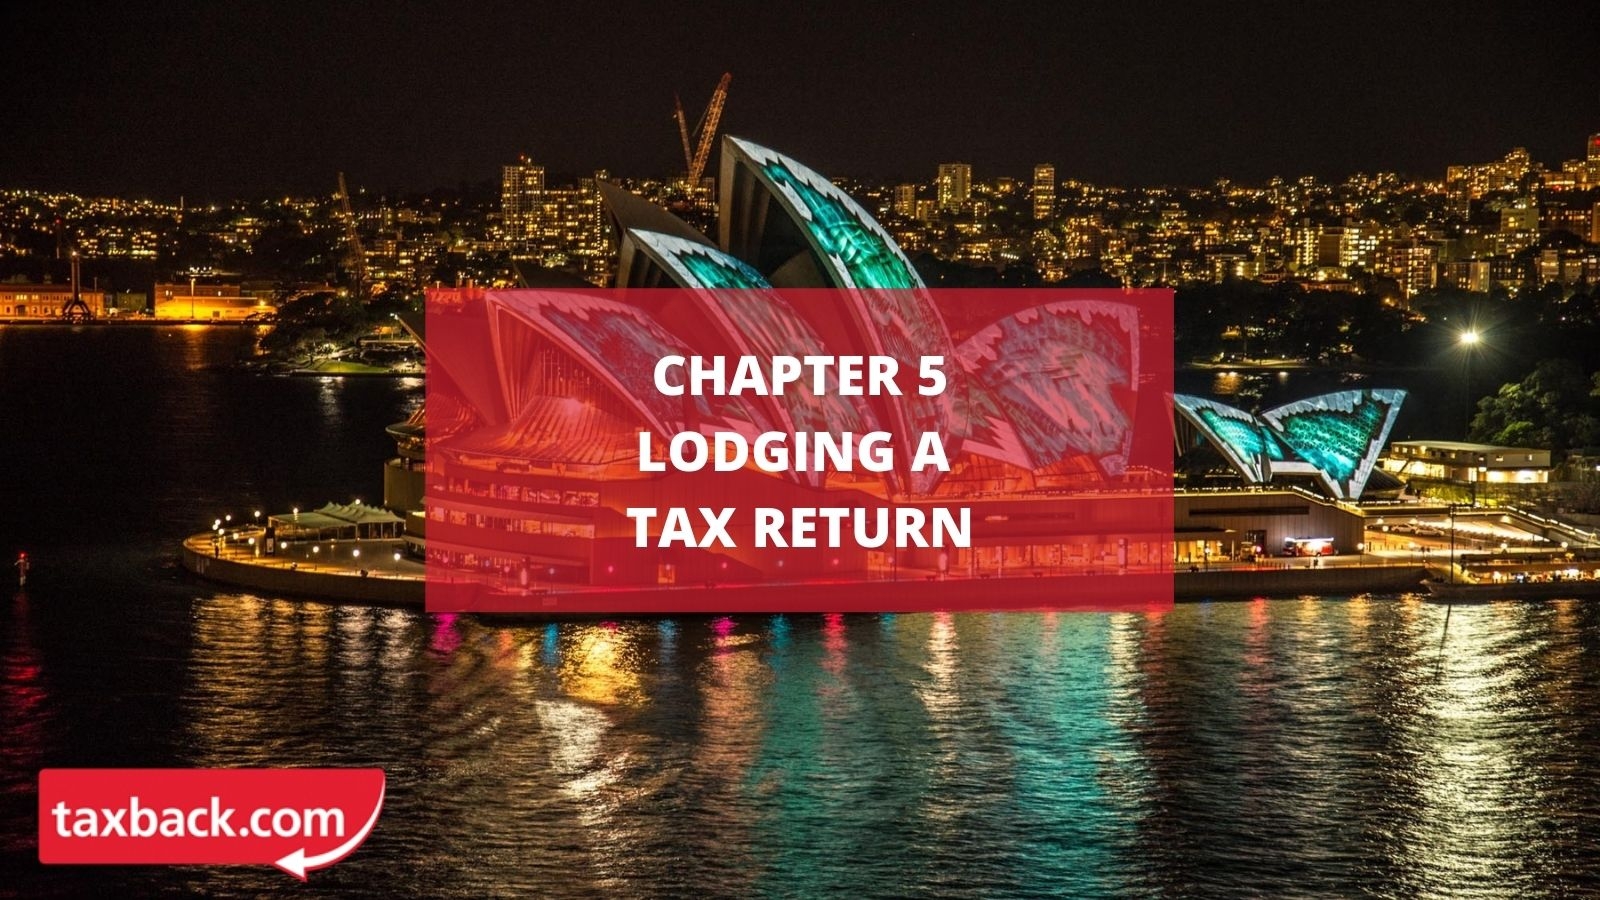 Paying tax and lodging a tax return